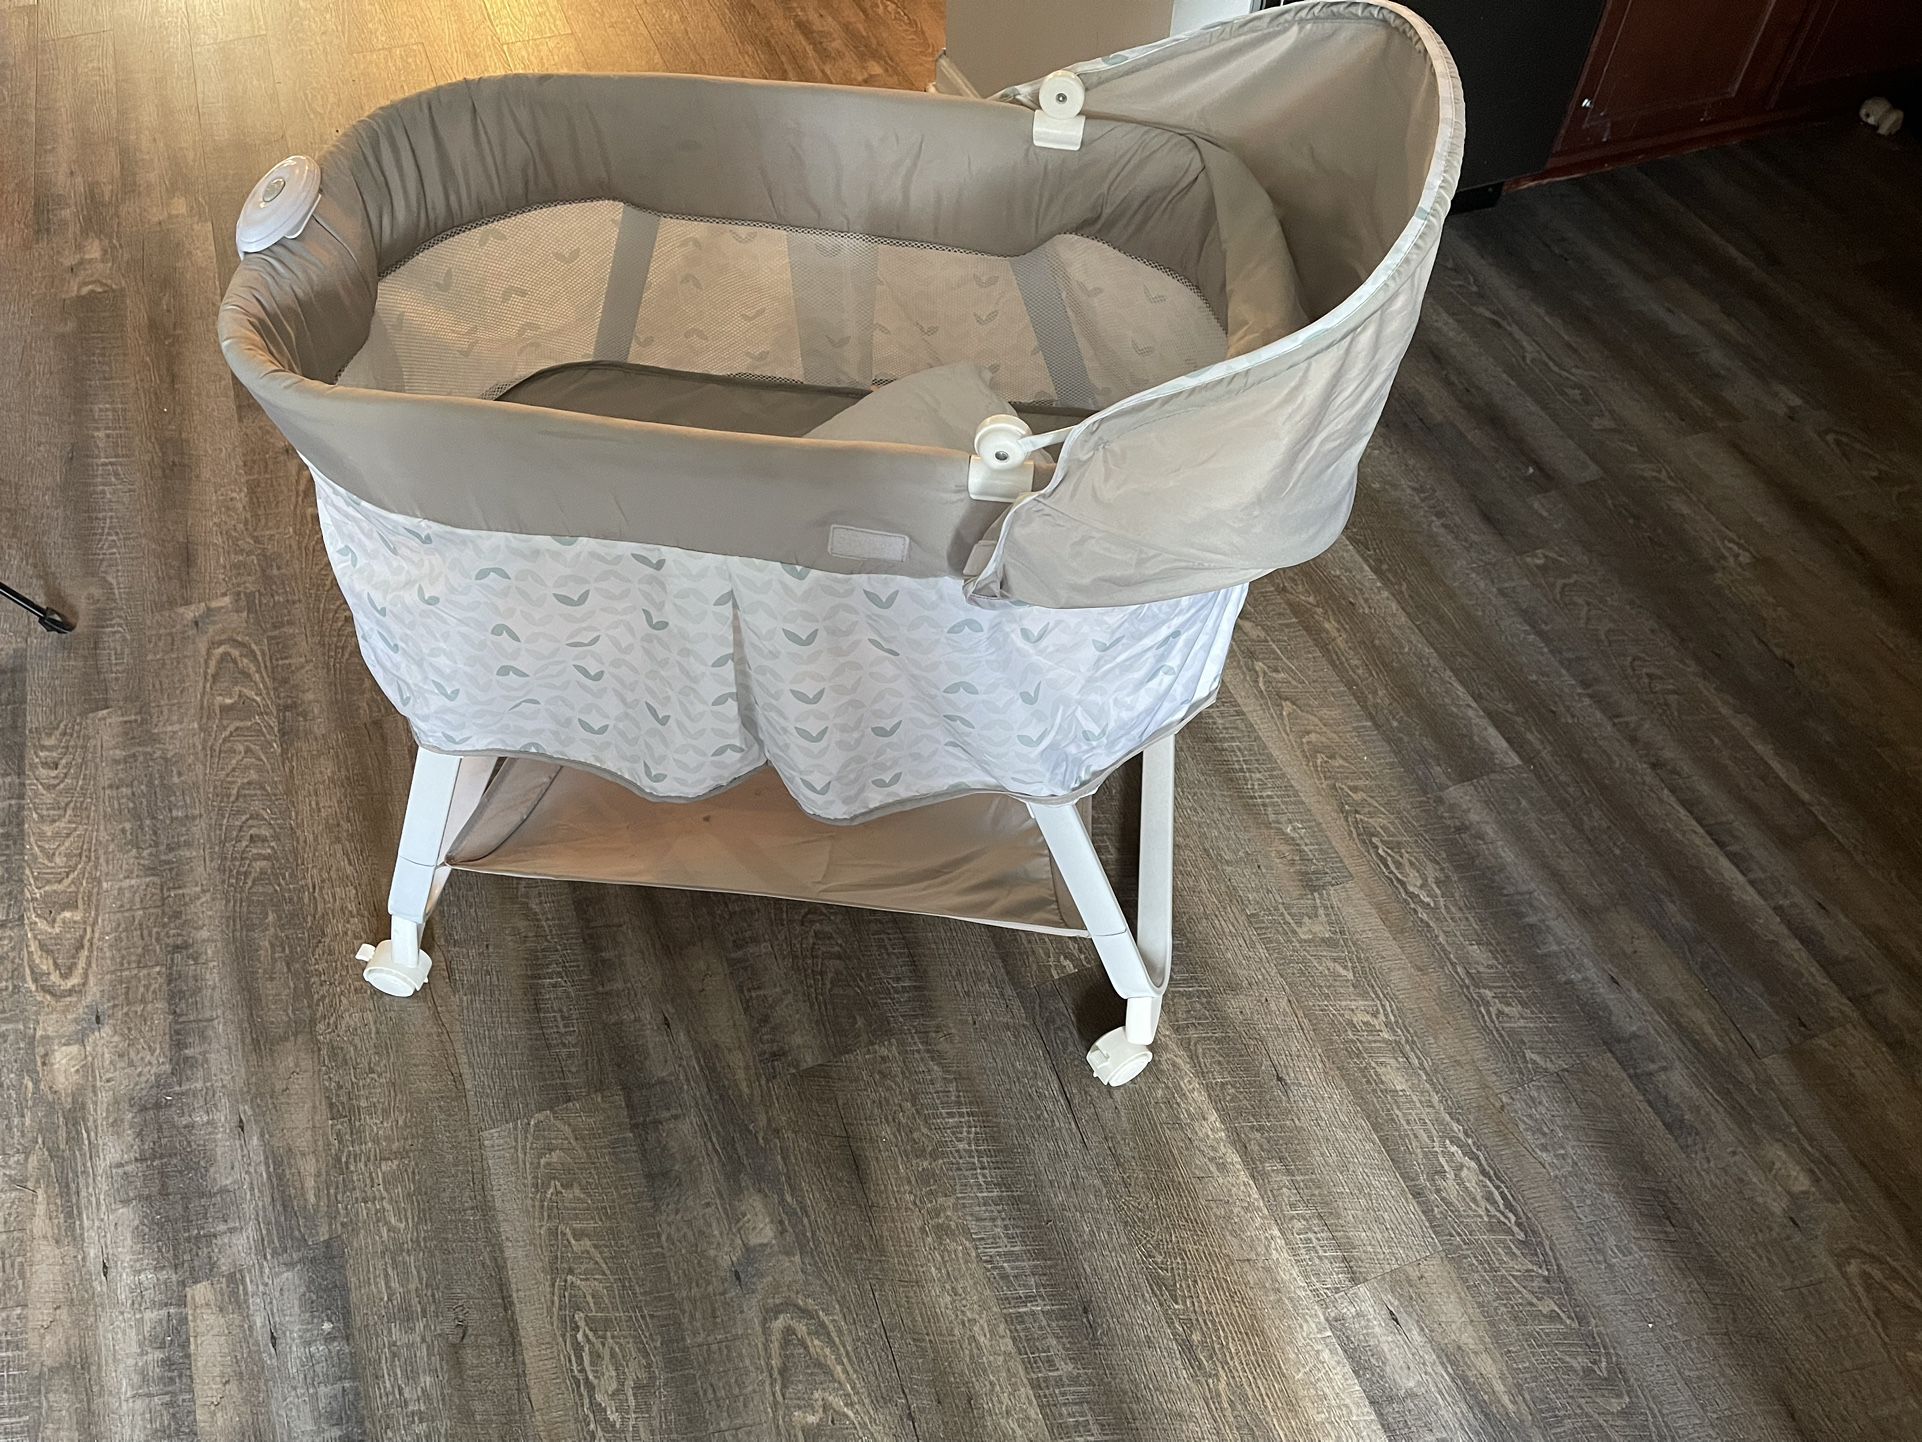 Ity by Ingenuity Snuggity Snug Soothing Vibrations Bassinet